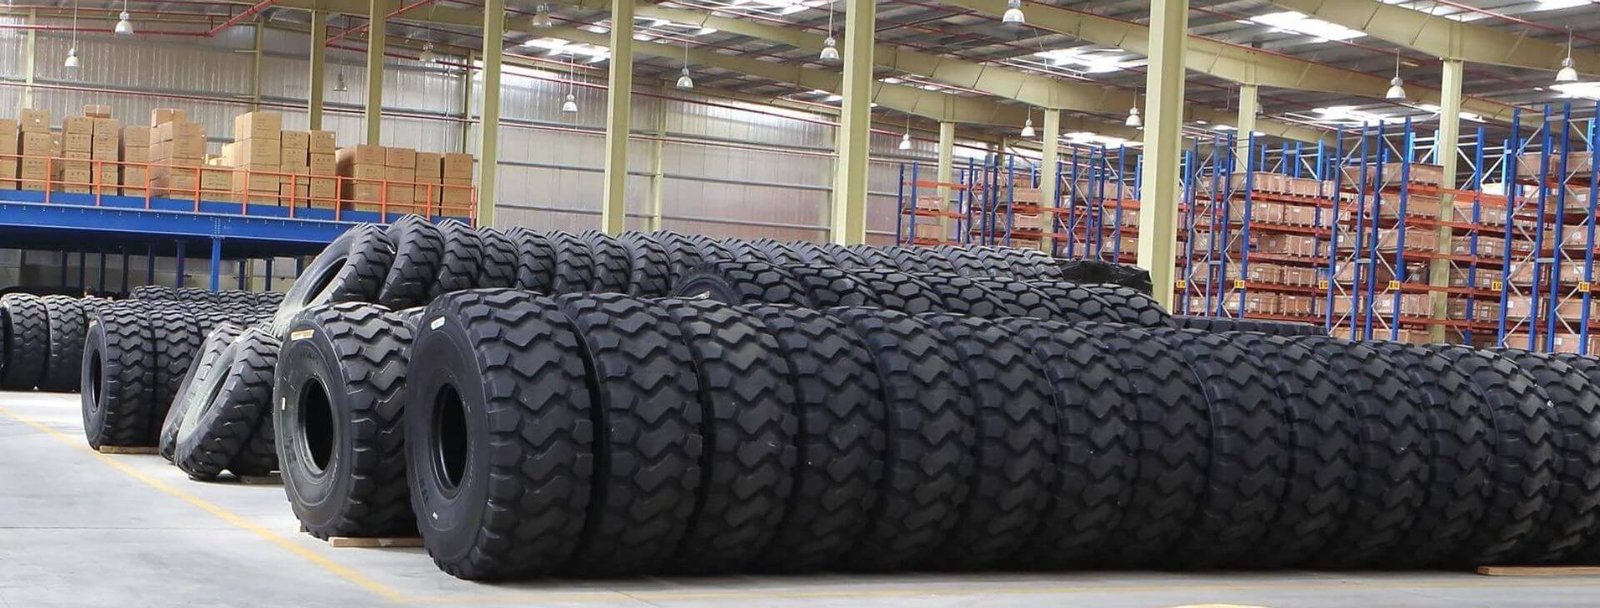 Buying Certified
High-quality Tires